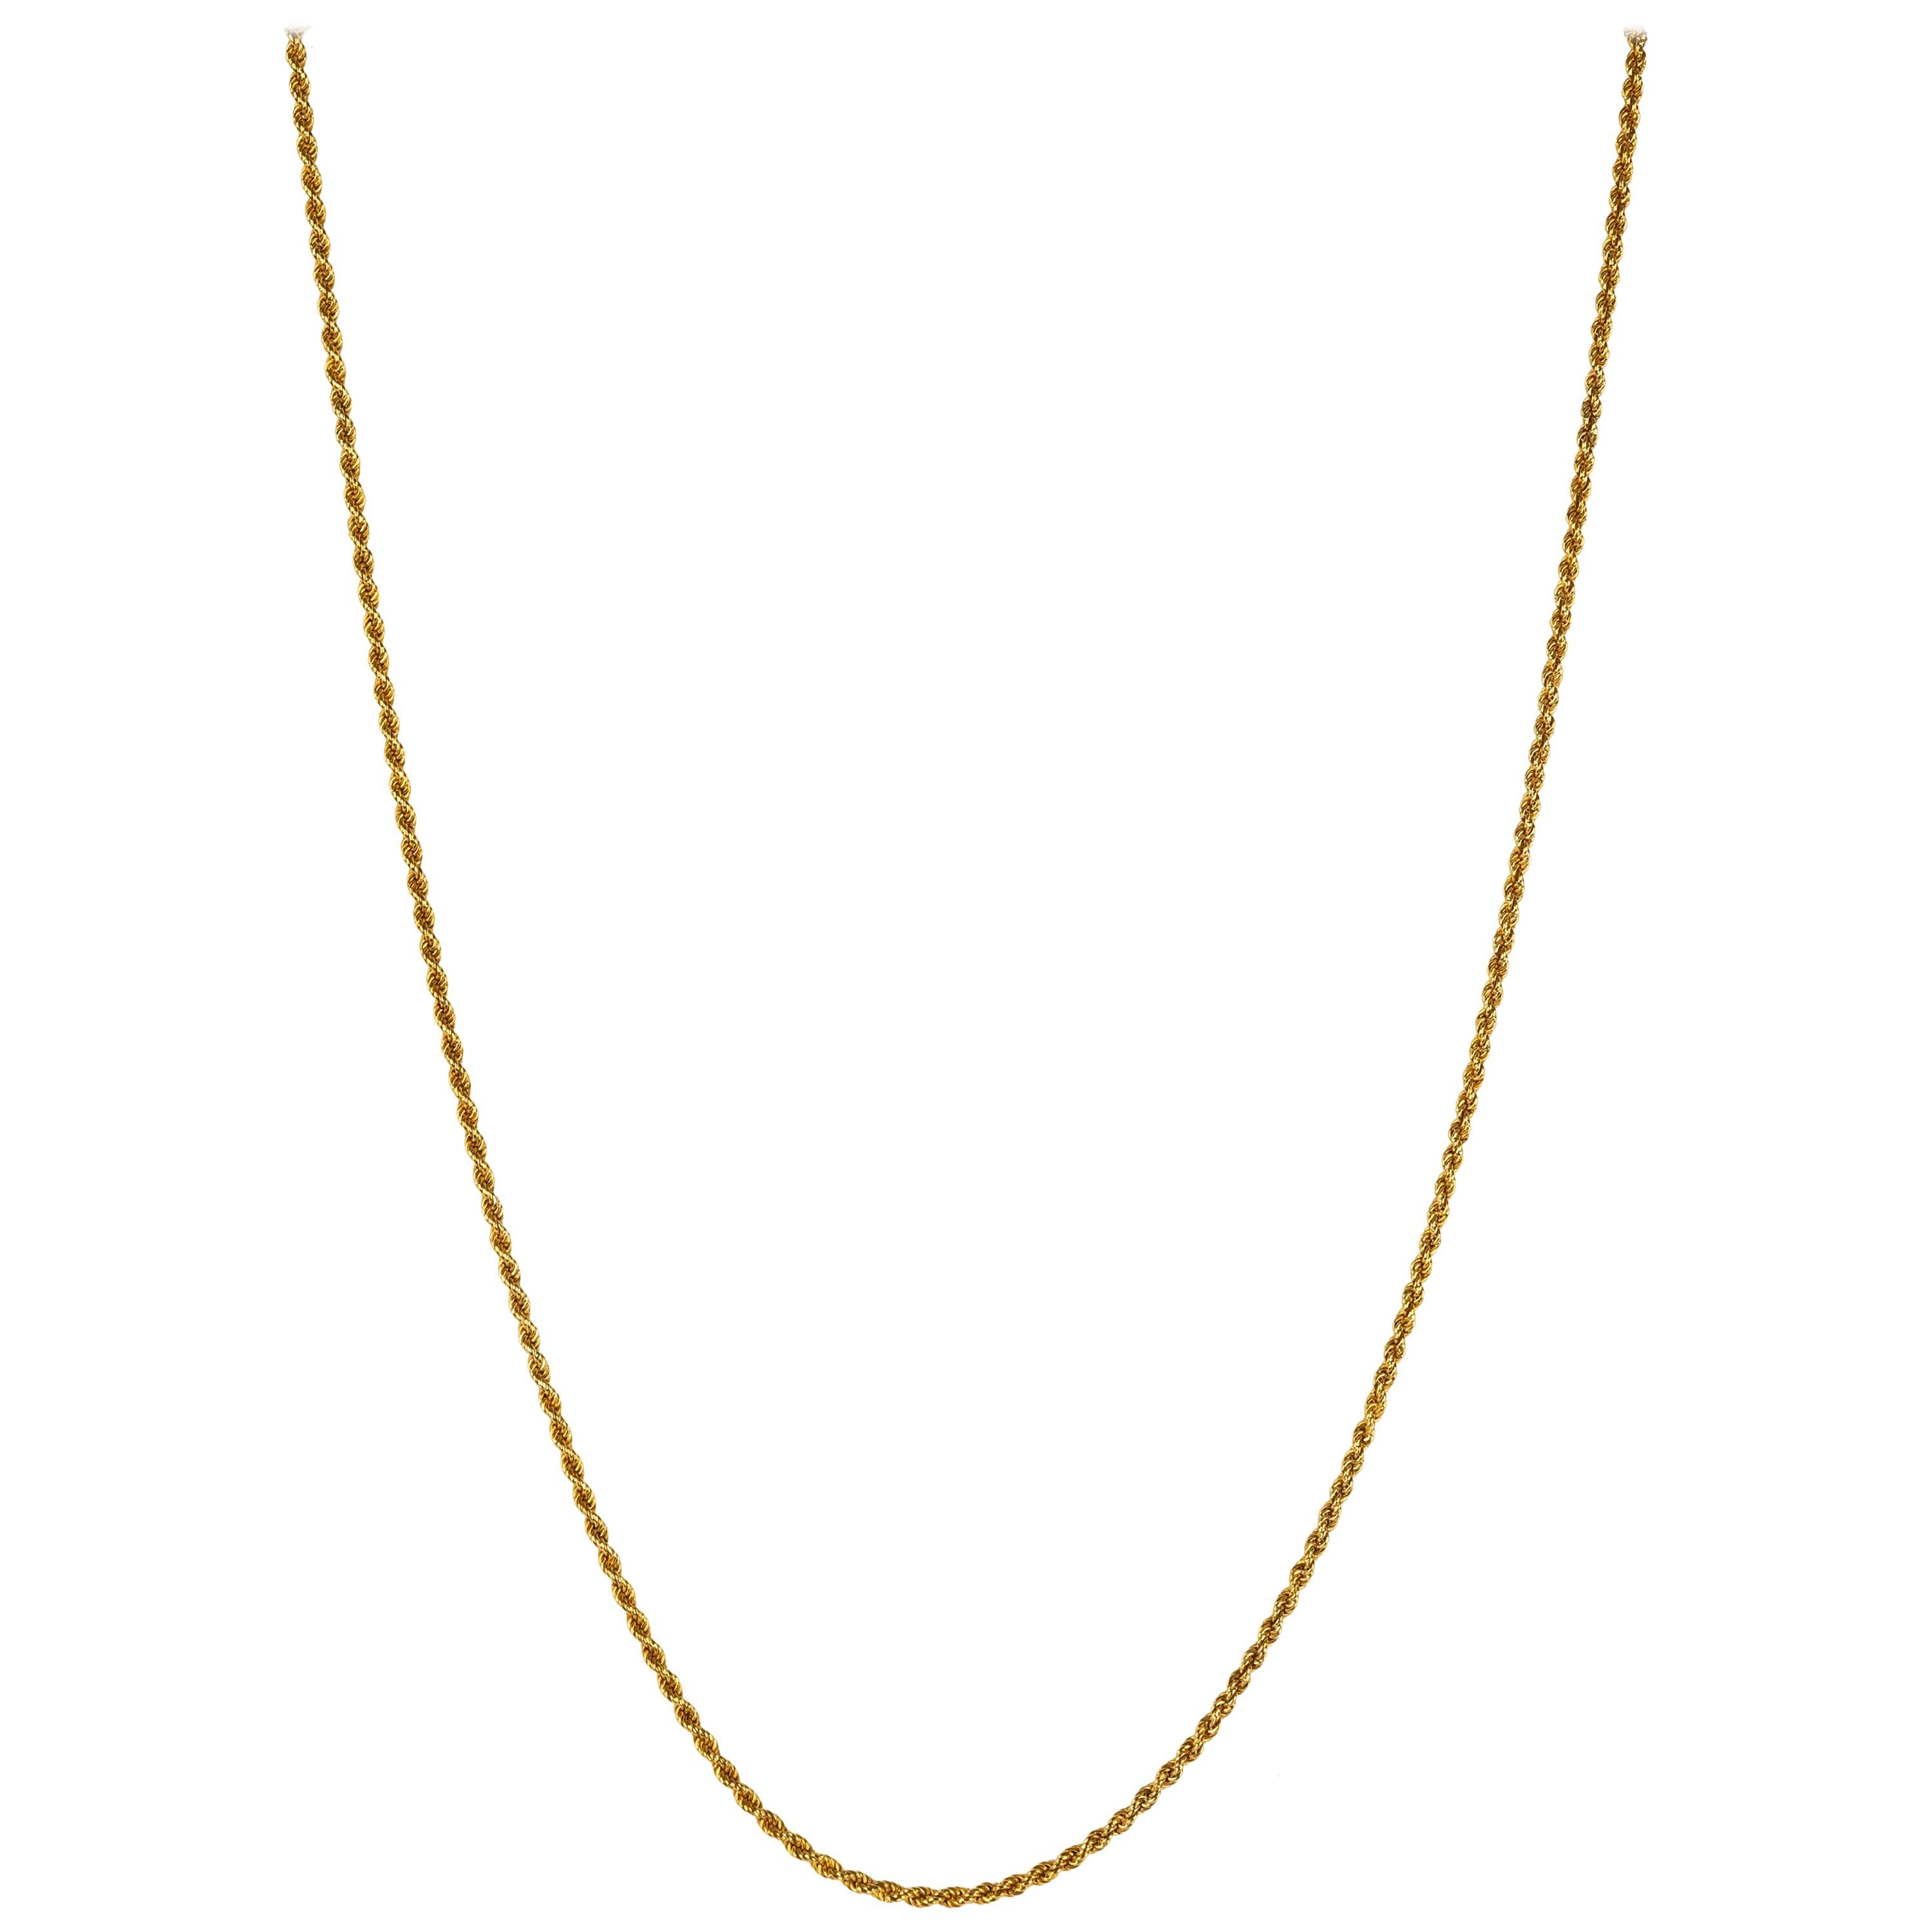 From the Romanov era, period of Tsar Nicholas II, a rare Russian gold rope chain from Moscow.

Stamped Moscow, 1908-17, 56 for the gold standard for 14k gold.  Attached to a later 14k yellow gold lobster clasp

25 in. (63.5 cm) long including